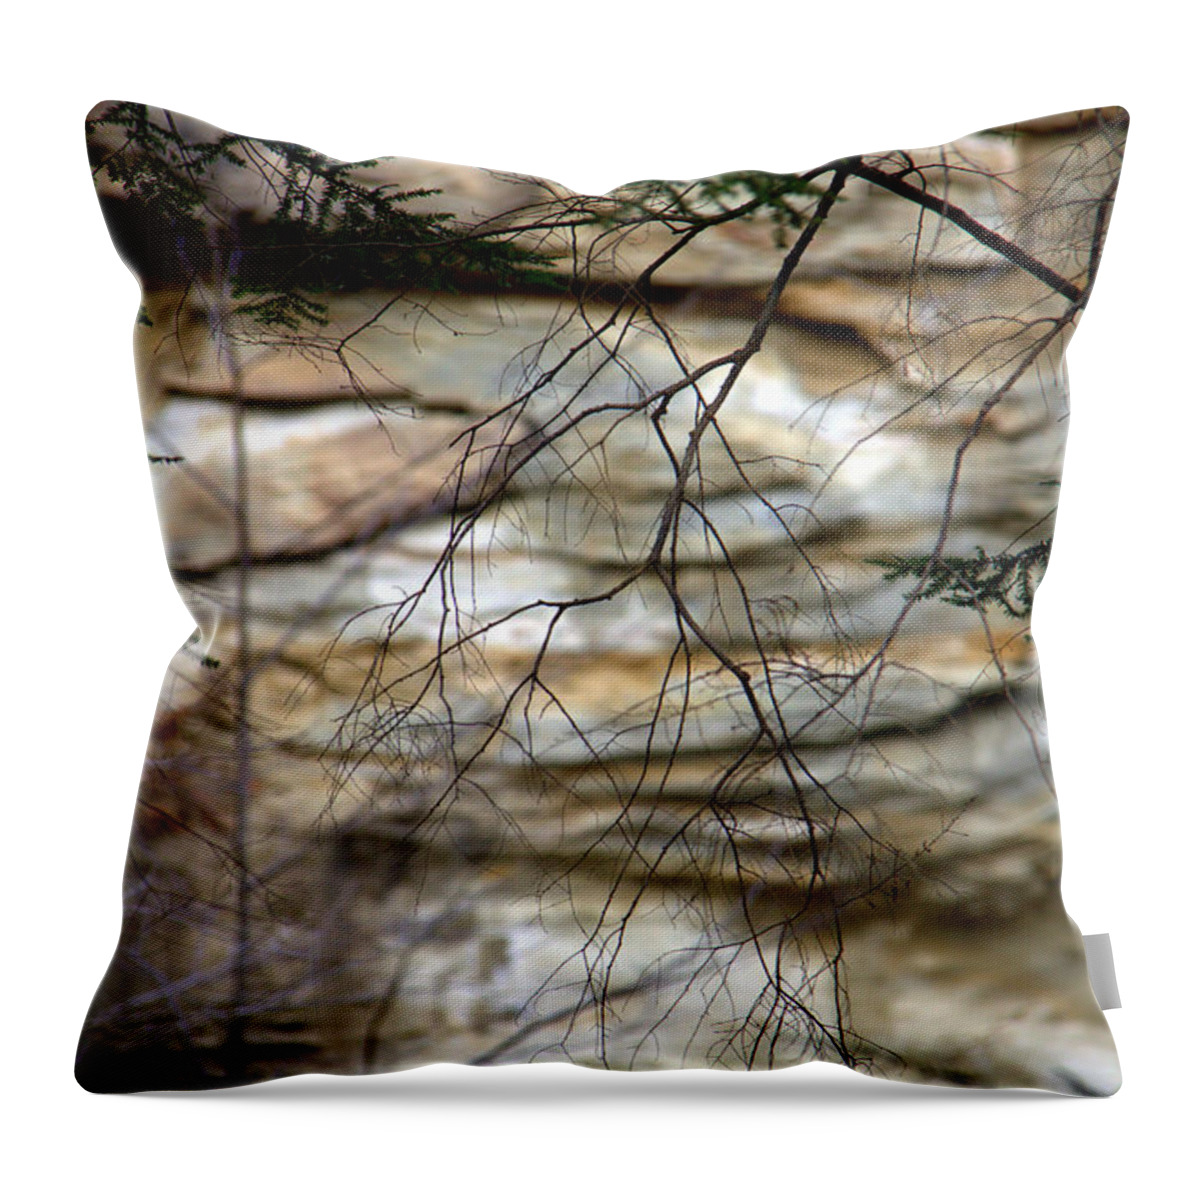 Missing You Again Throw Pillow featuring the photograph Missing You Again by Edward Smith